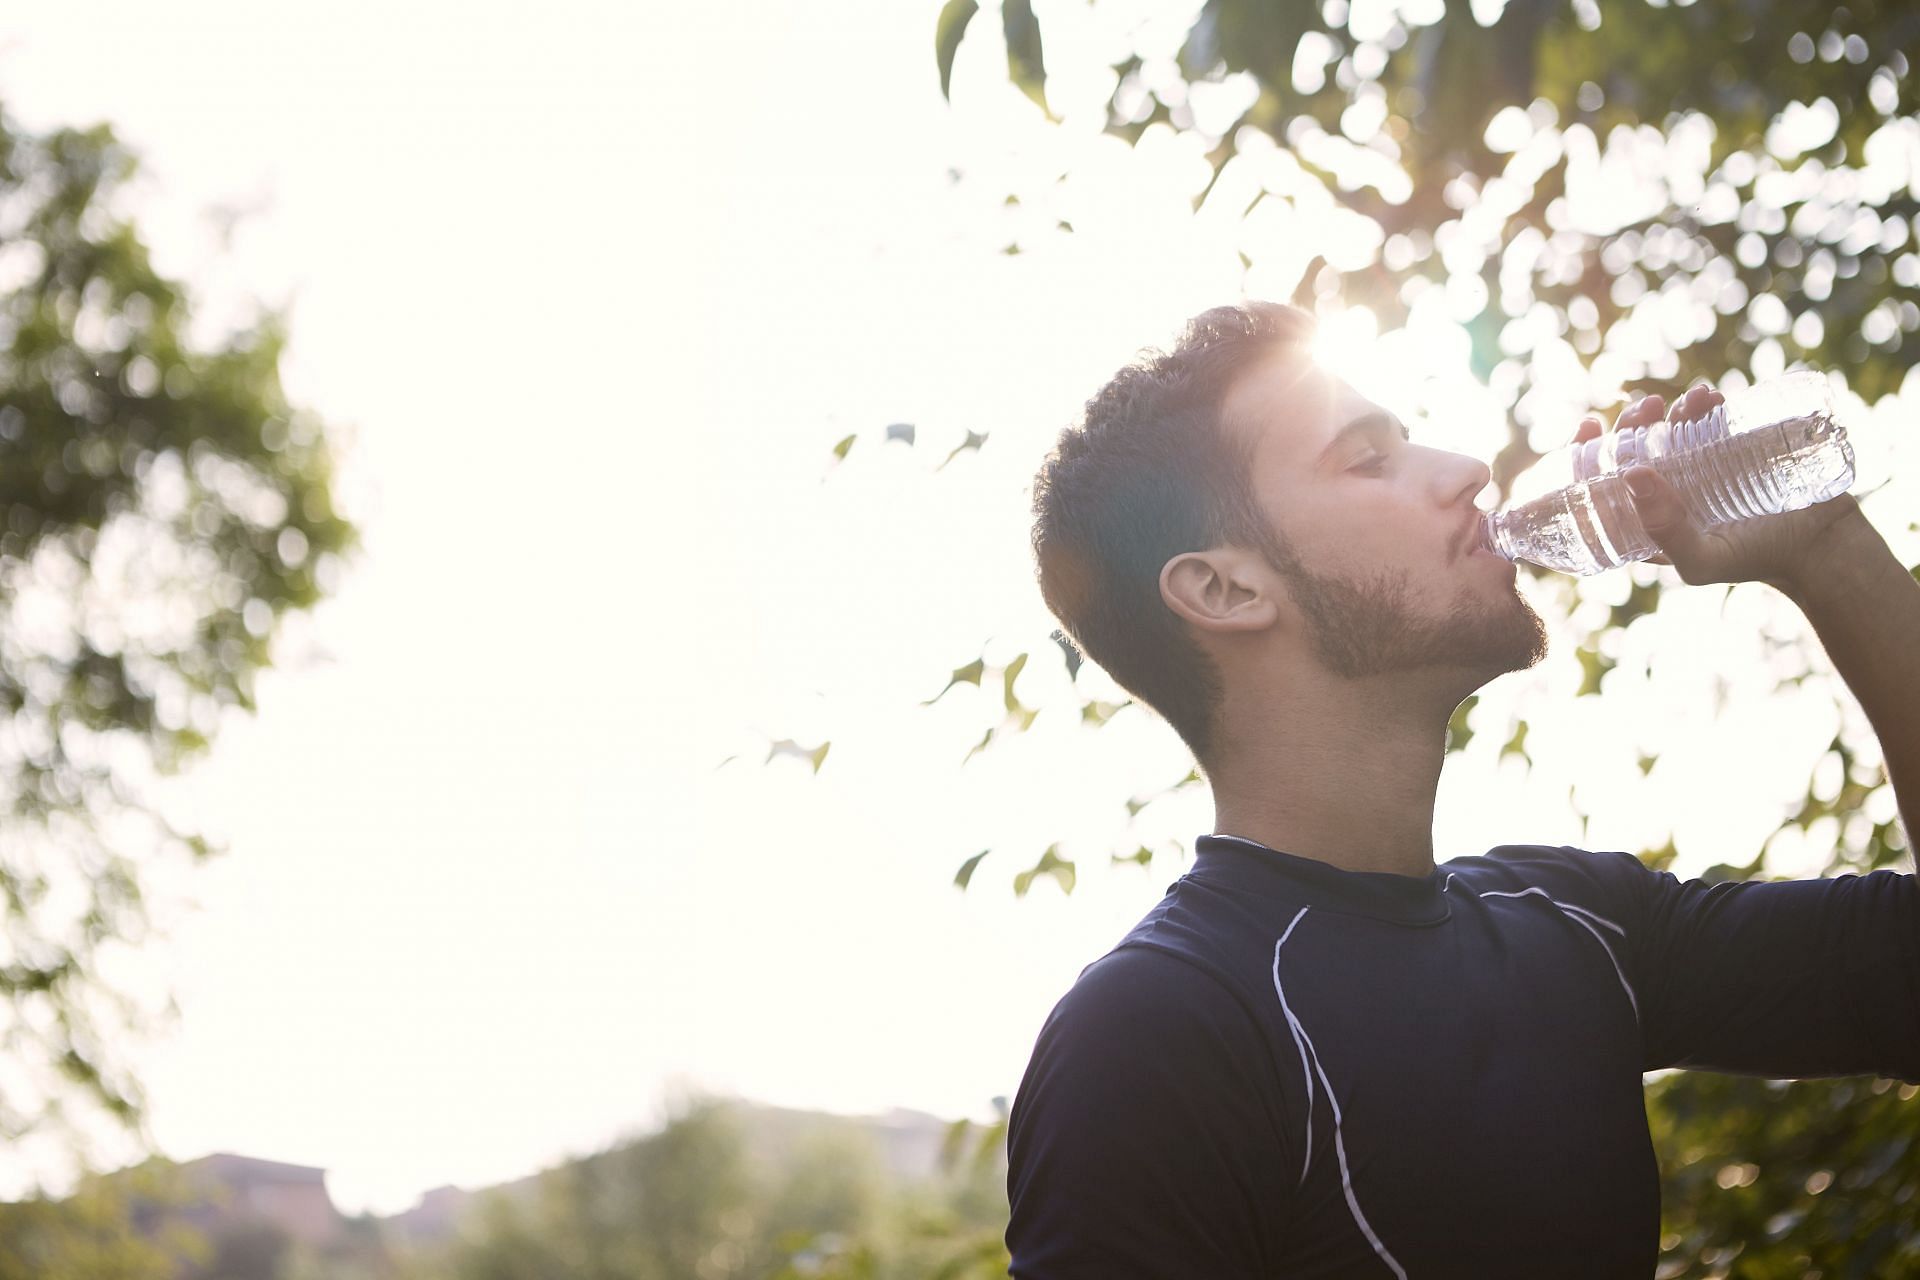 Drinking water is linked to improved athletic performance. (Image via Pexels/Andrea Piacquadio)